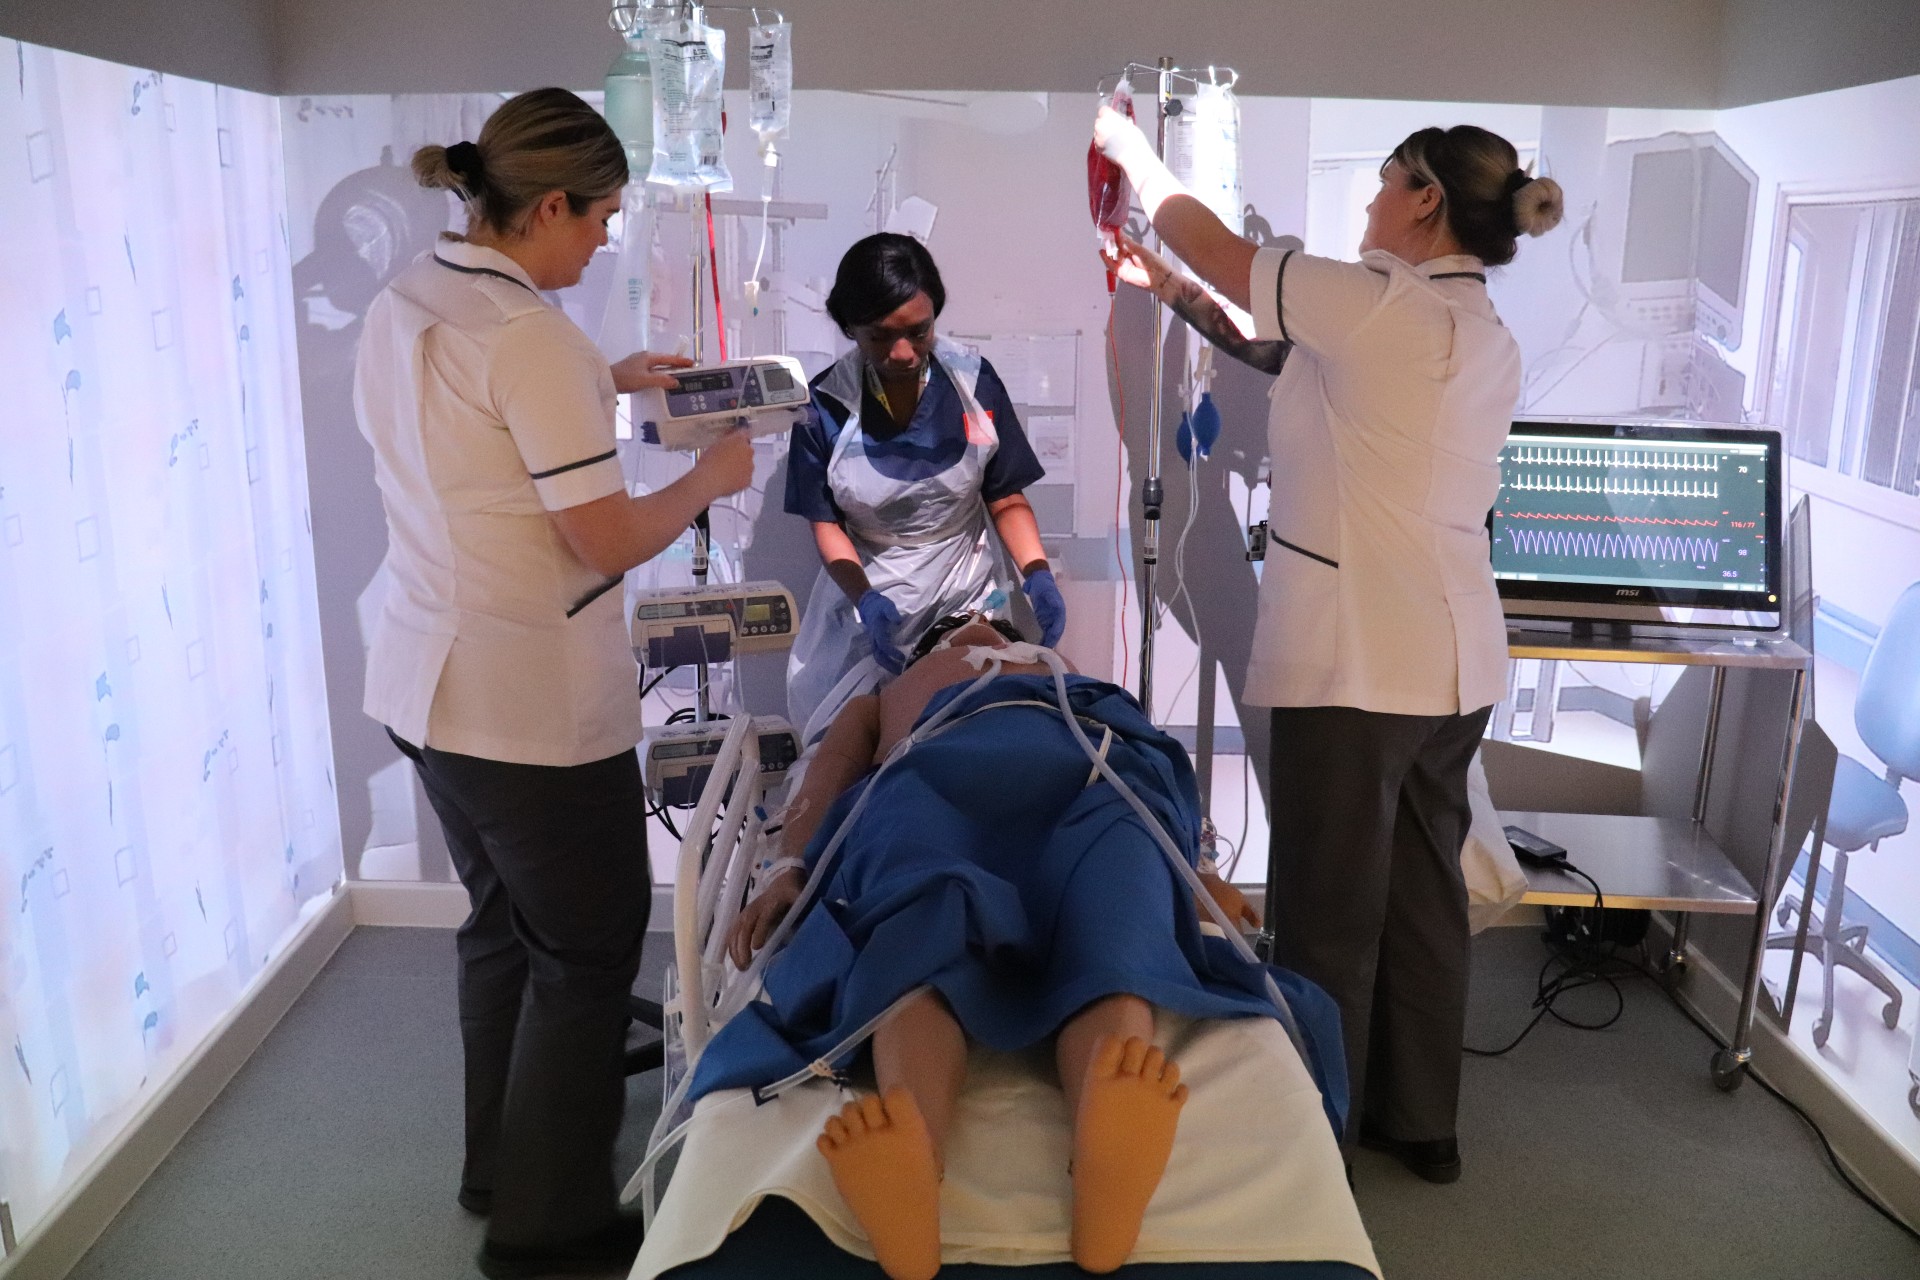 Critical care simulation in our smaller immersive room.